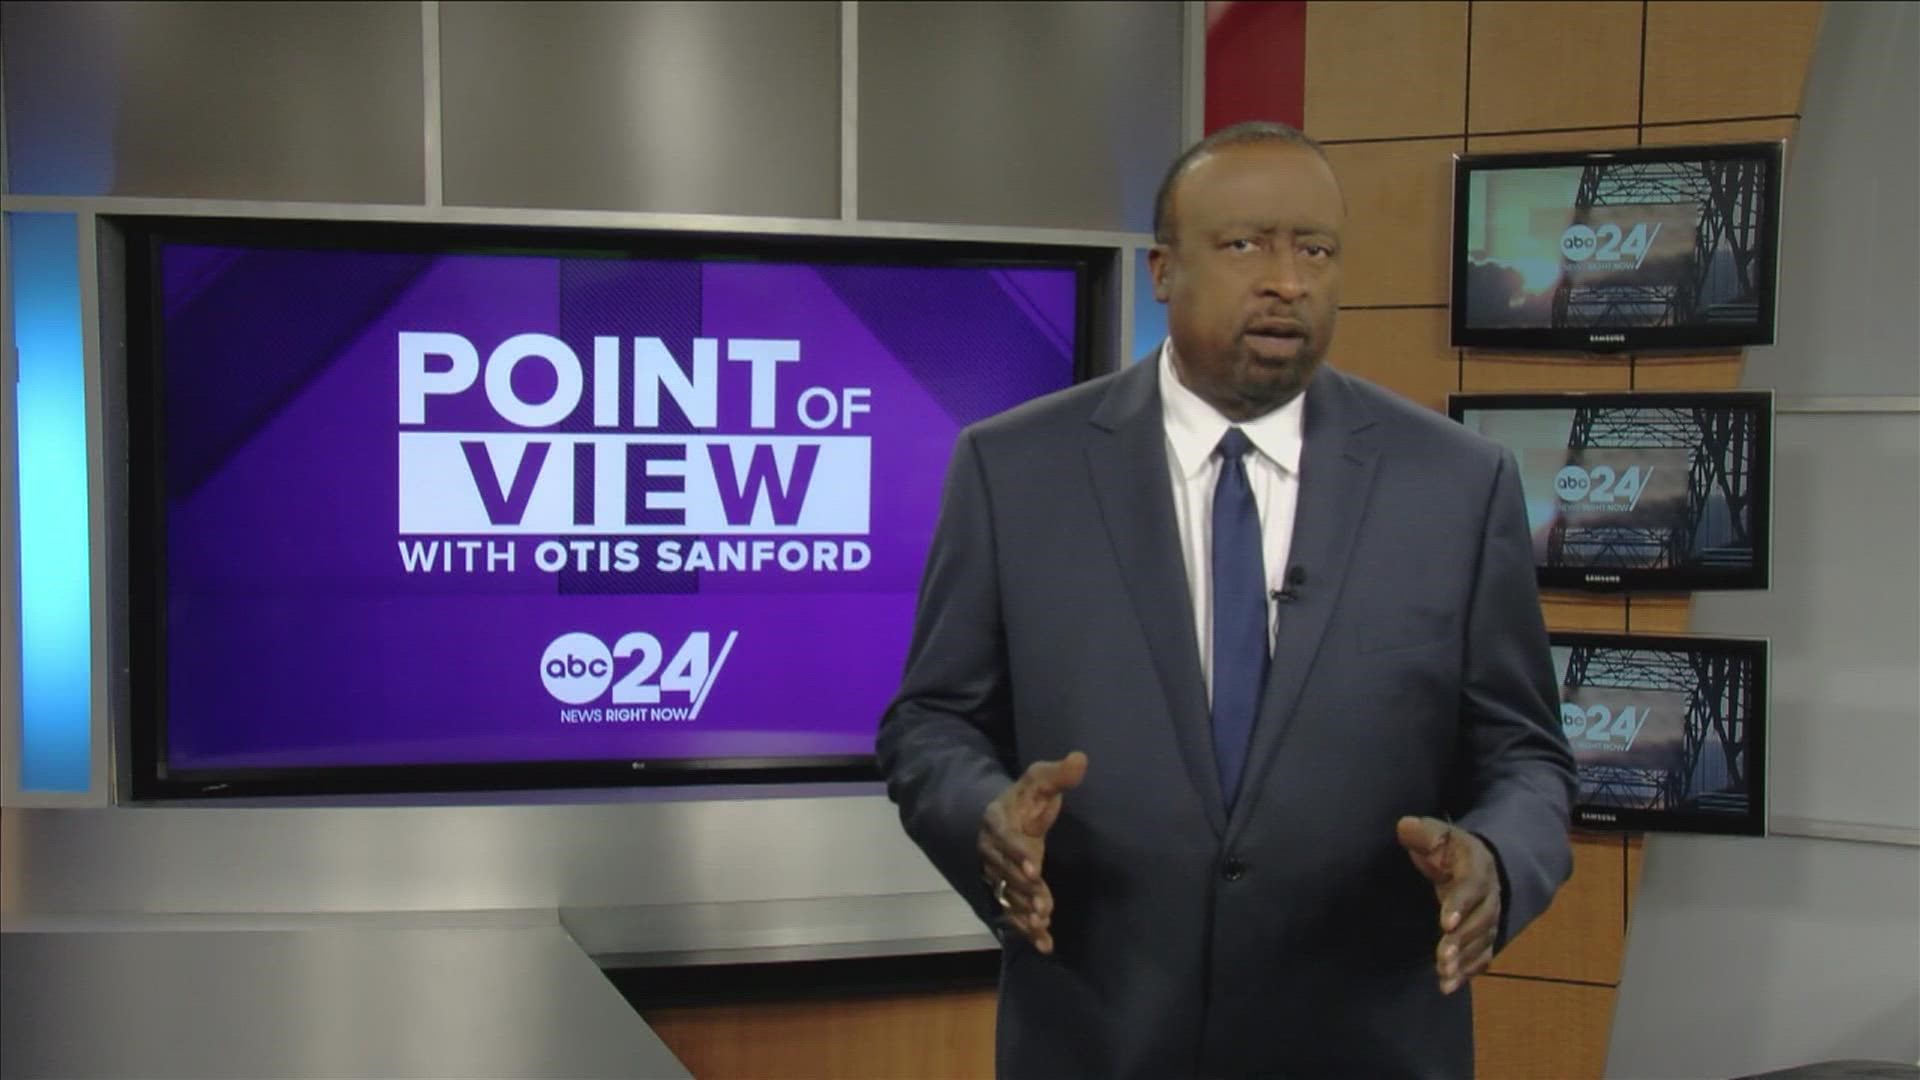 ABC24 political analyst and commentator Otis Sanford shared his point of view on the Tennessee Attorney General not seeking another term.